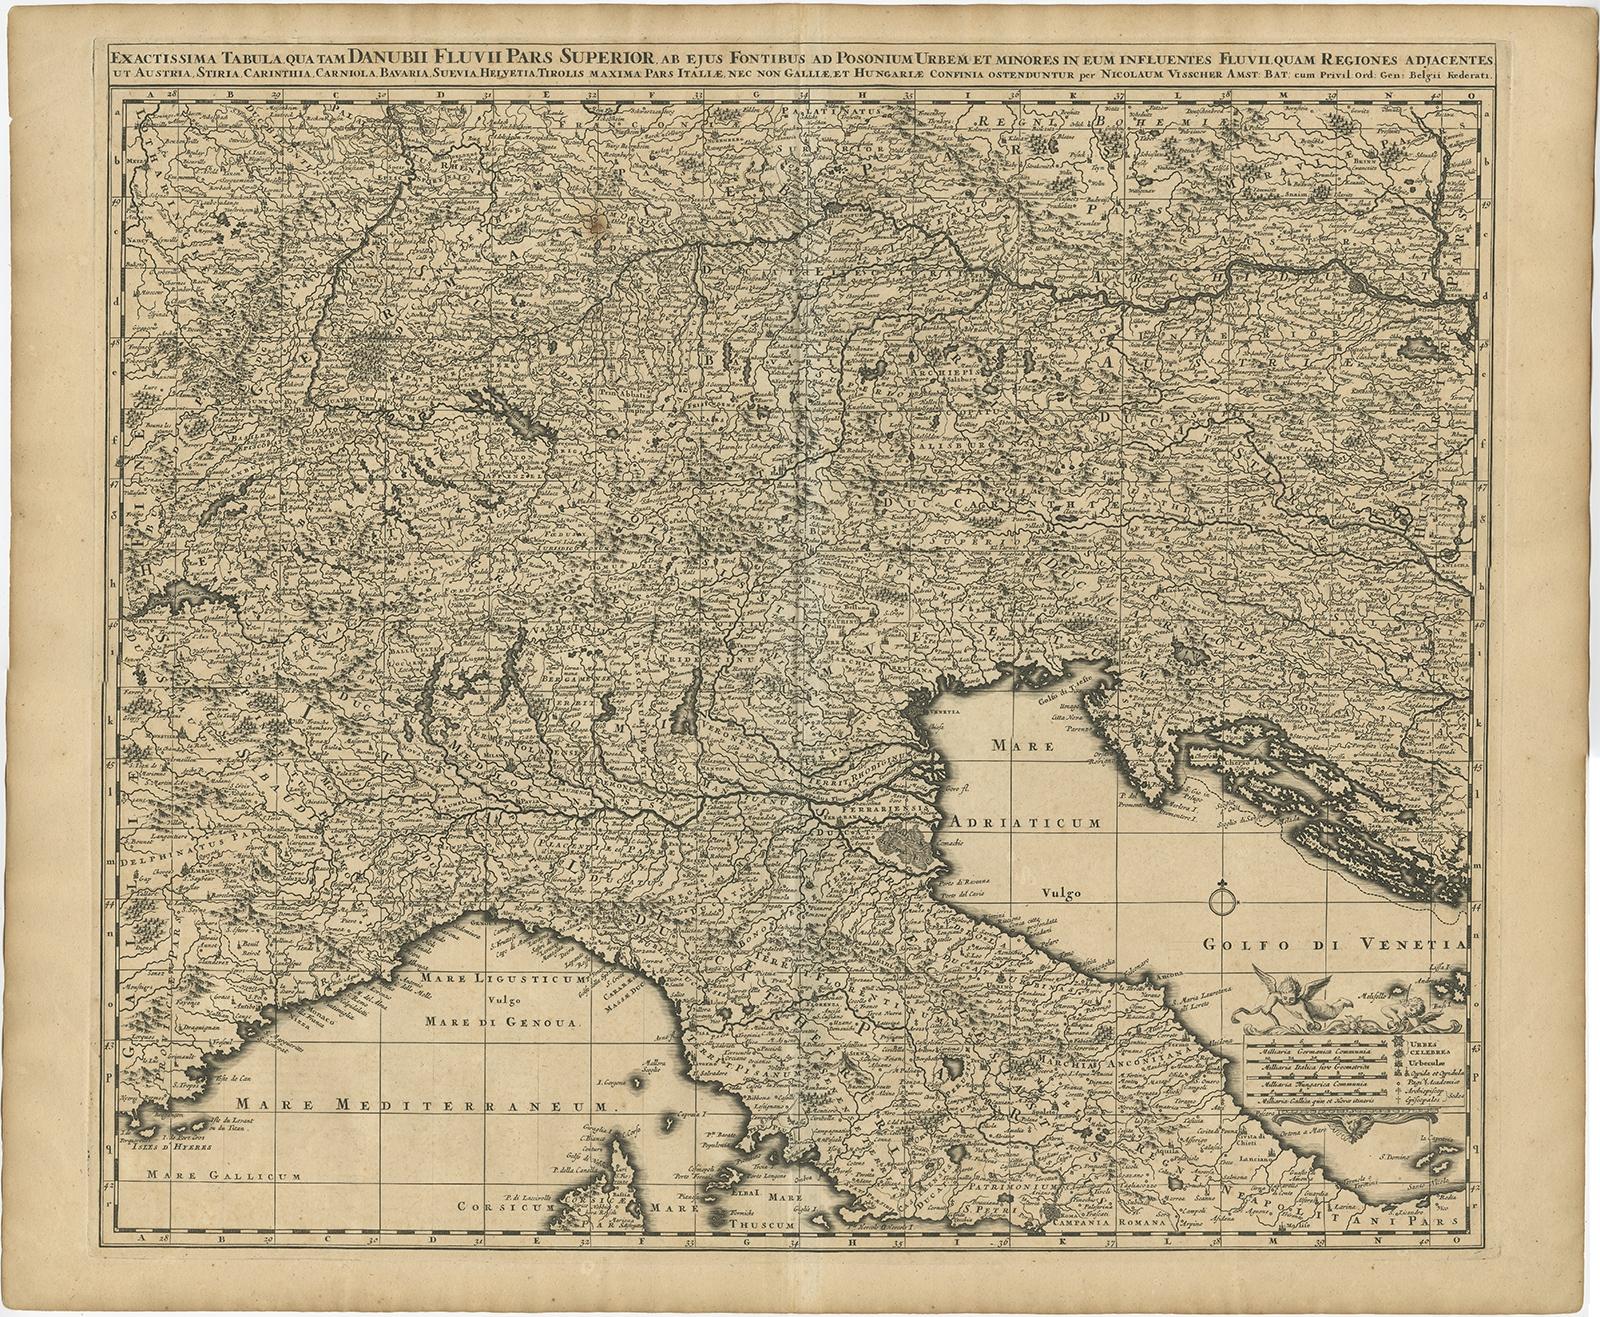 Antique map titled 'Exactissima Tabula, qua tam Danubii Fluvii Pars Superior'. 

Detailed map covering the region of northern Italy, Austria, Slovenia and Croatia. The course of the Danube is prominently shown from its headwaters in the Alps to